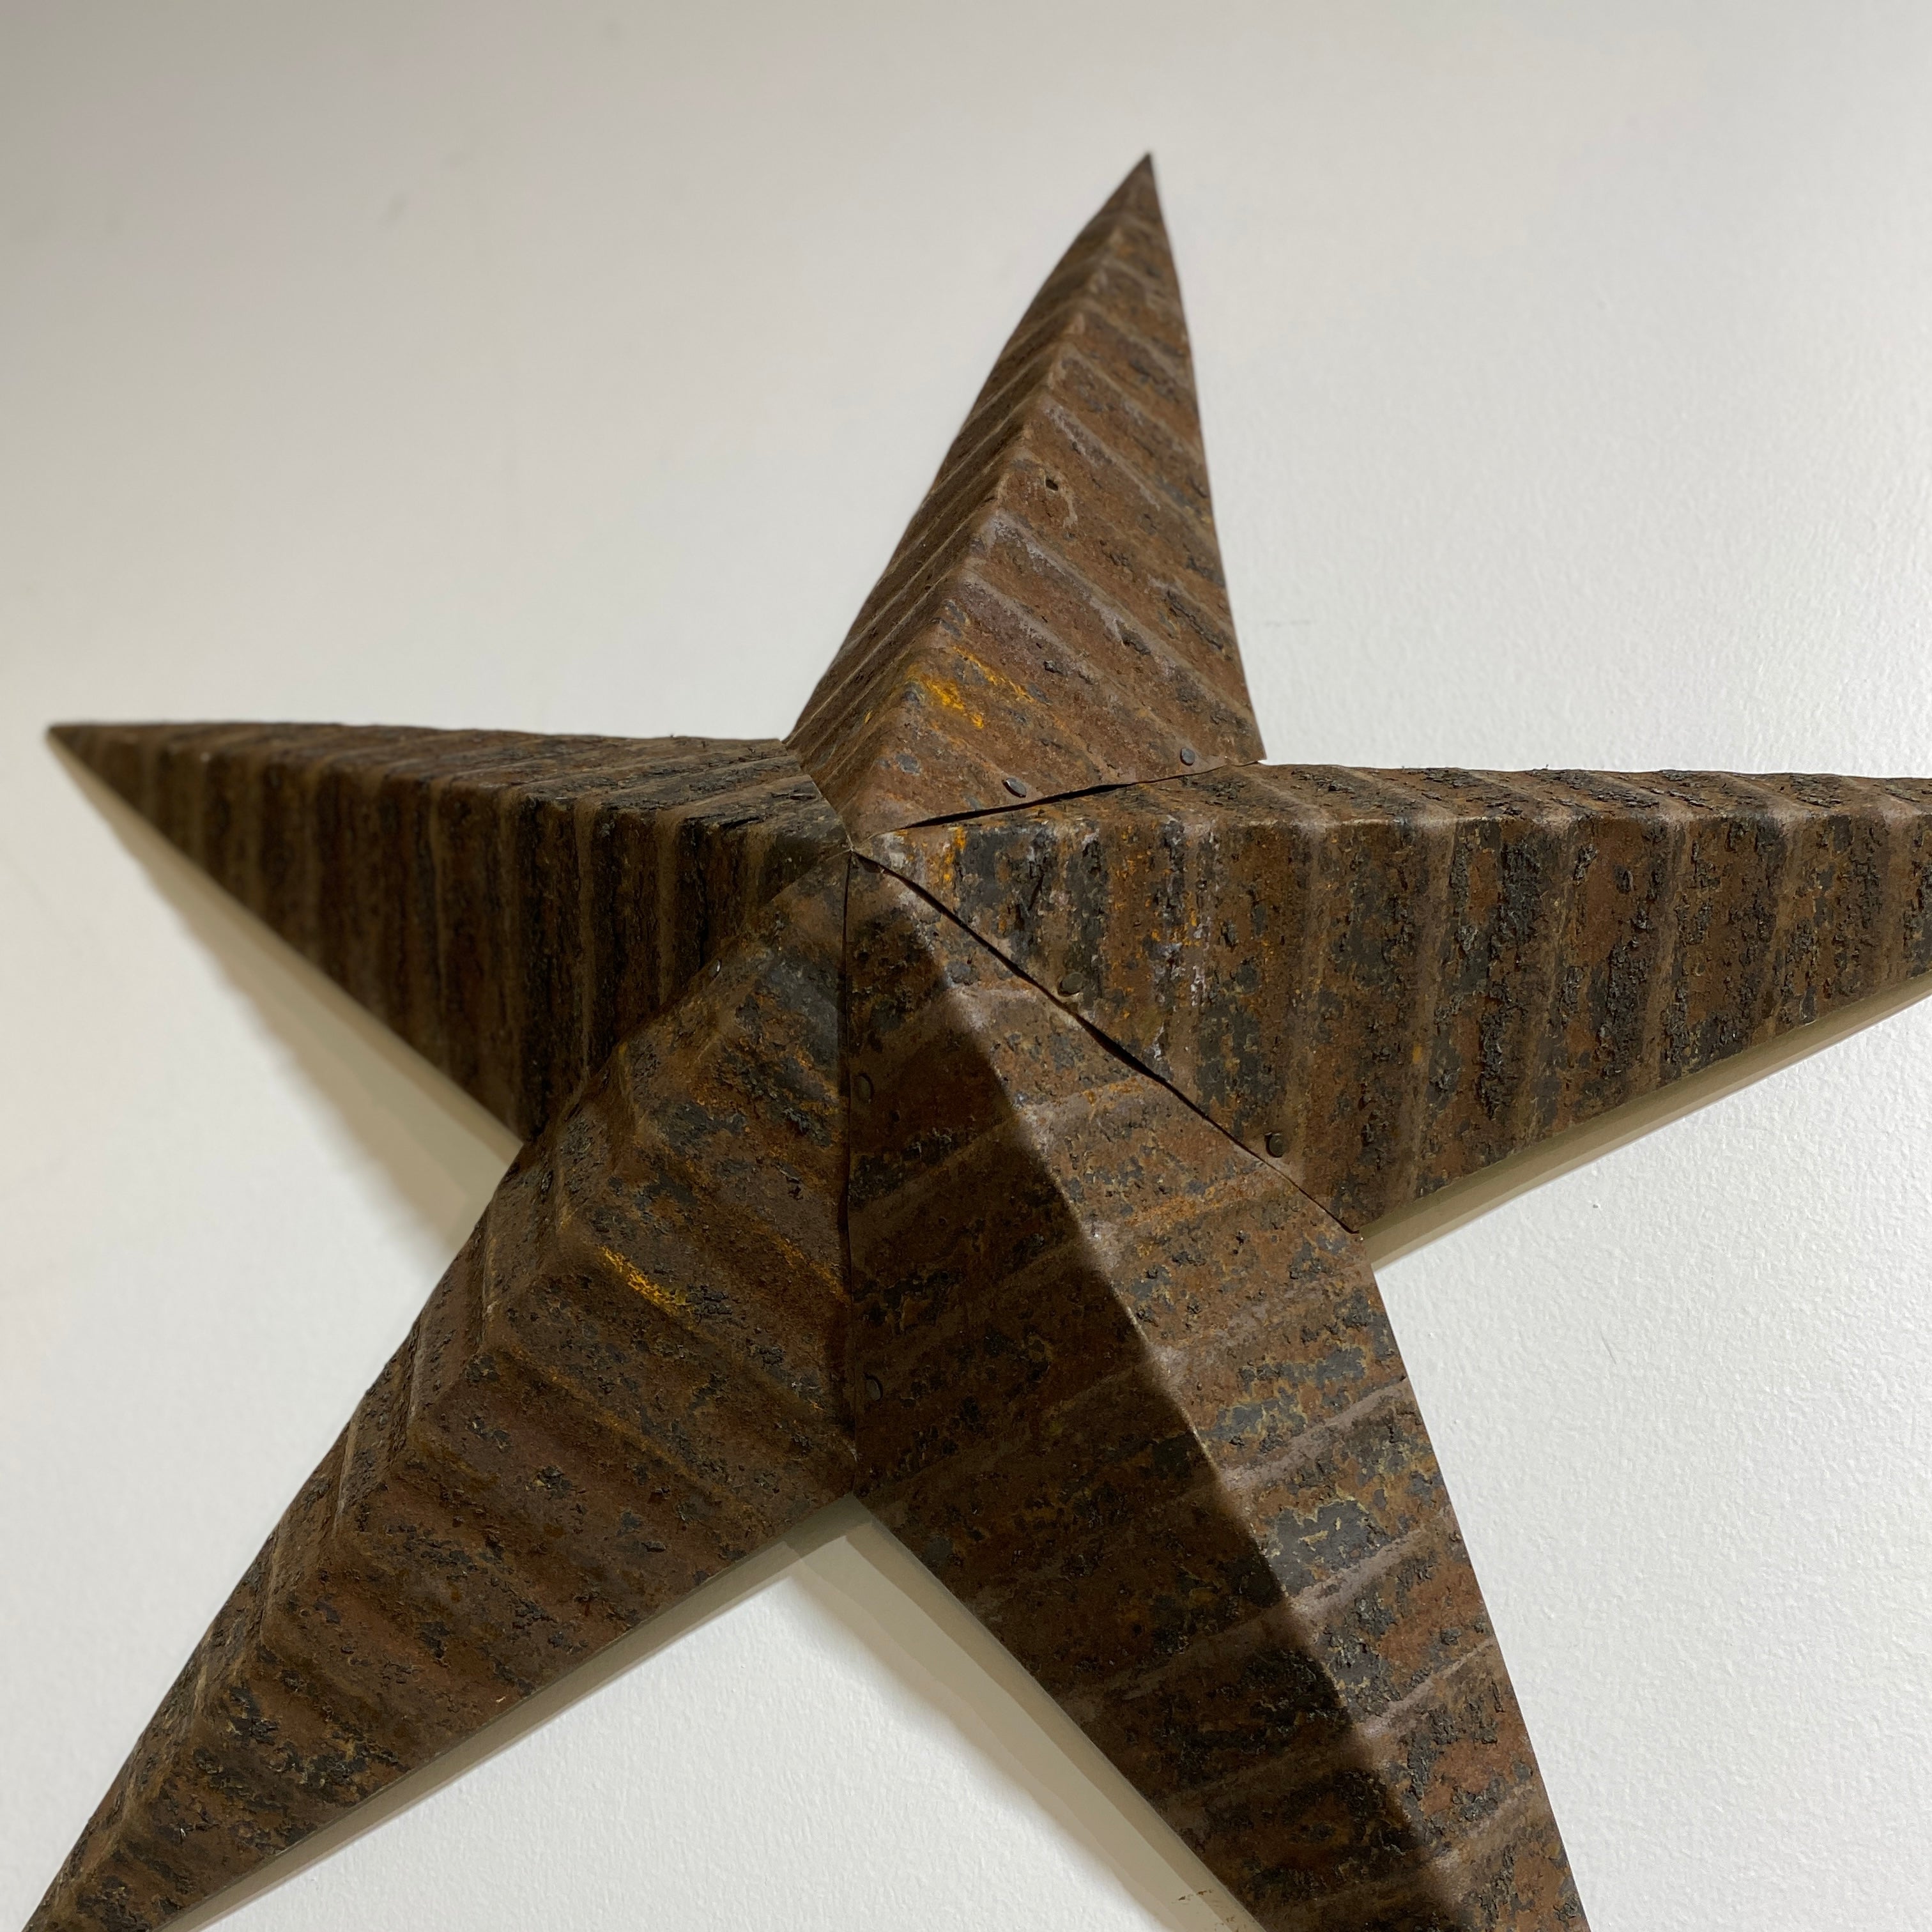 Authentic Amish Barn Star - large 75 CM DIAMETER - RUSTED IRON